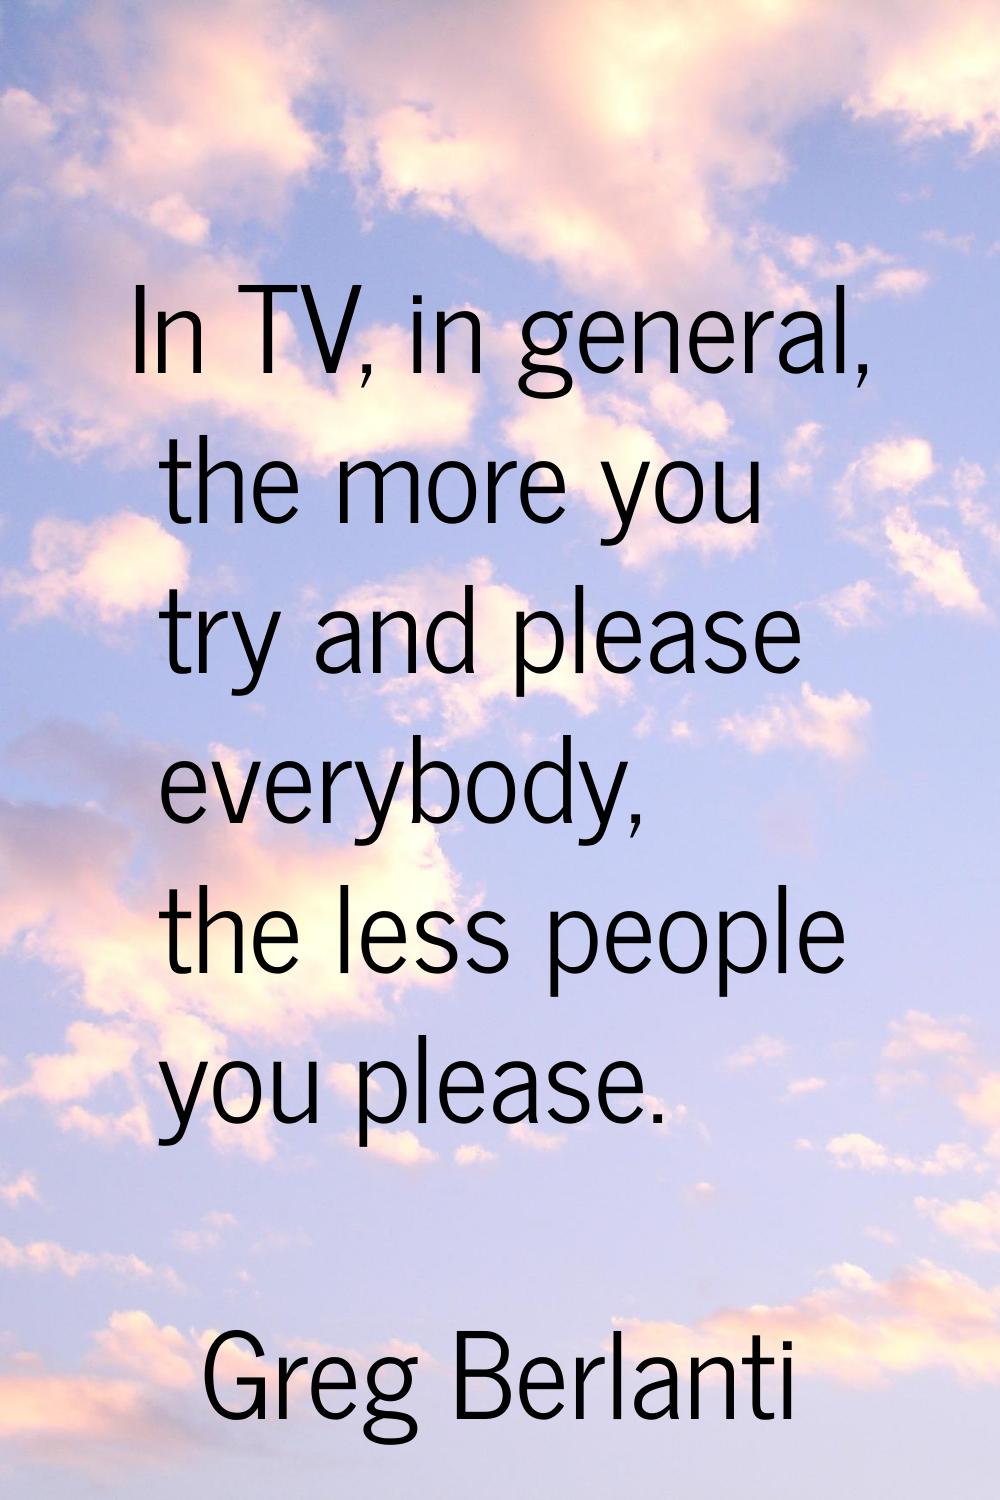 In TV, in general, the more you try and please everybody, the less people you please.